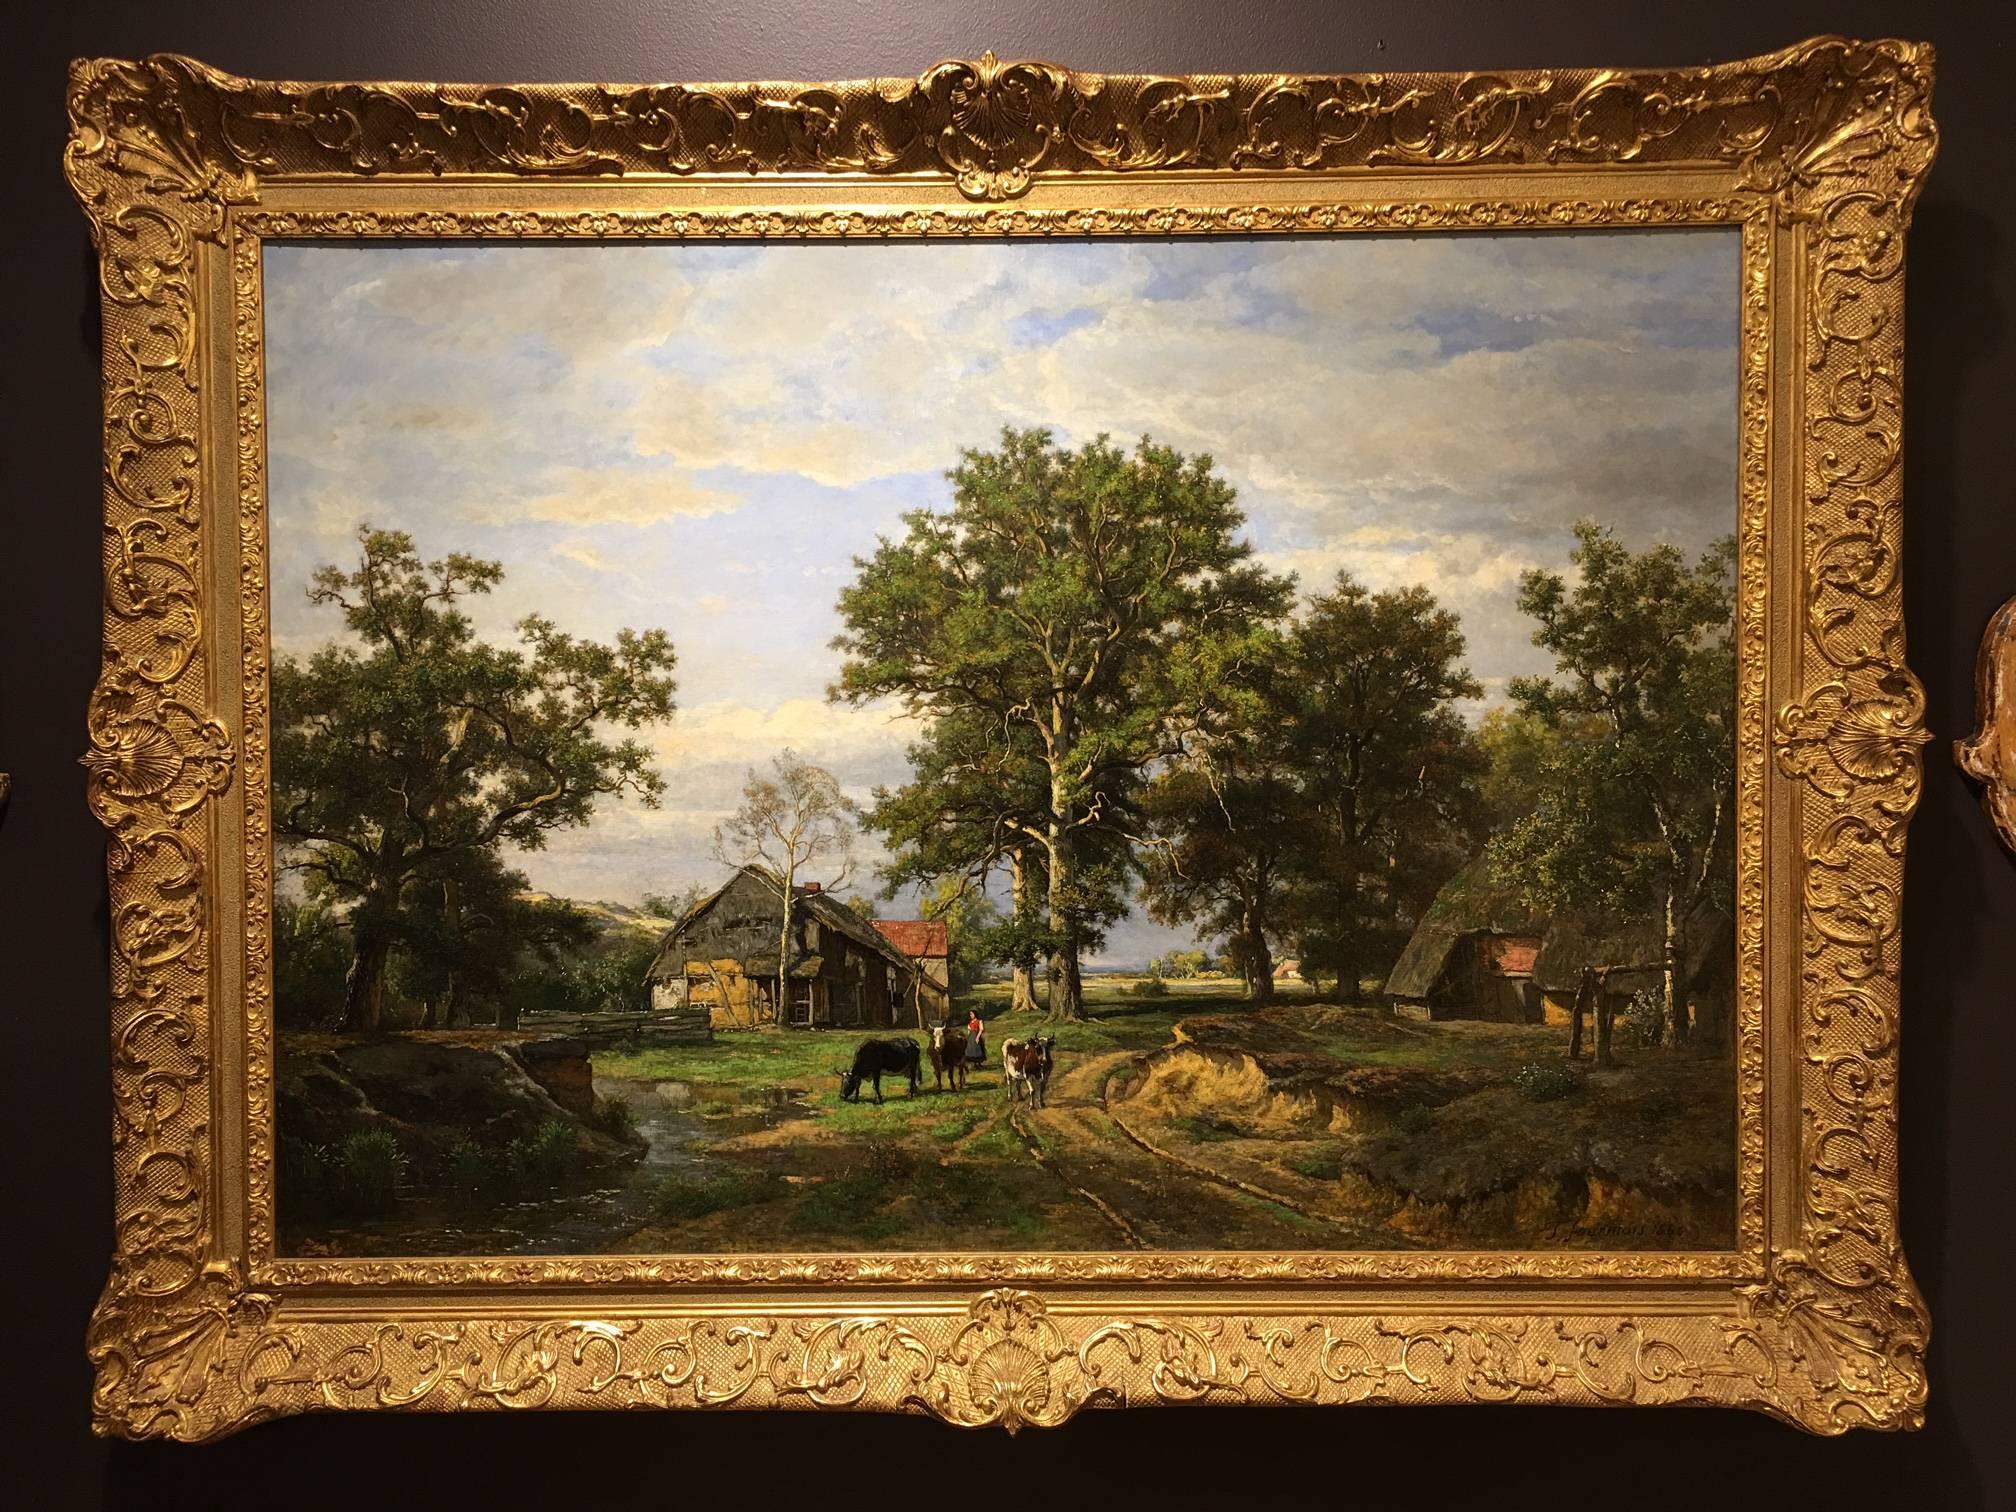 This oil on canvas painting by Belgian artist Theodore Fourmois (1814-1871) is entitled "Life on the Farm" and is dated 1866. Influenced by the Barbizon School, Fourmois showed a predilection for the plein-air landscape genre. Developing